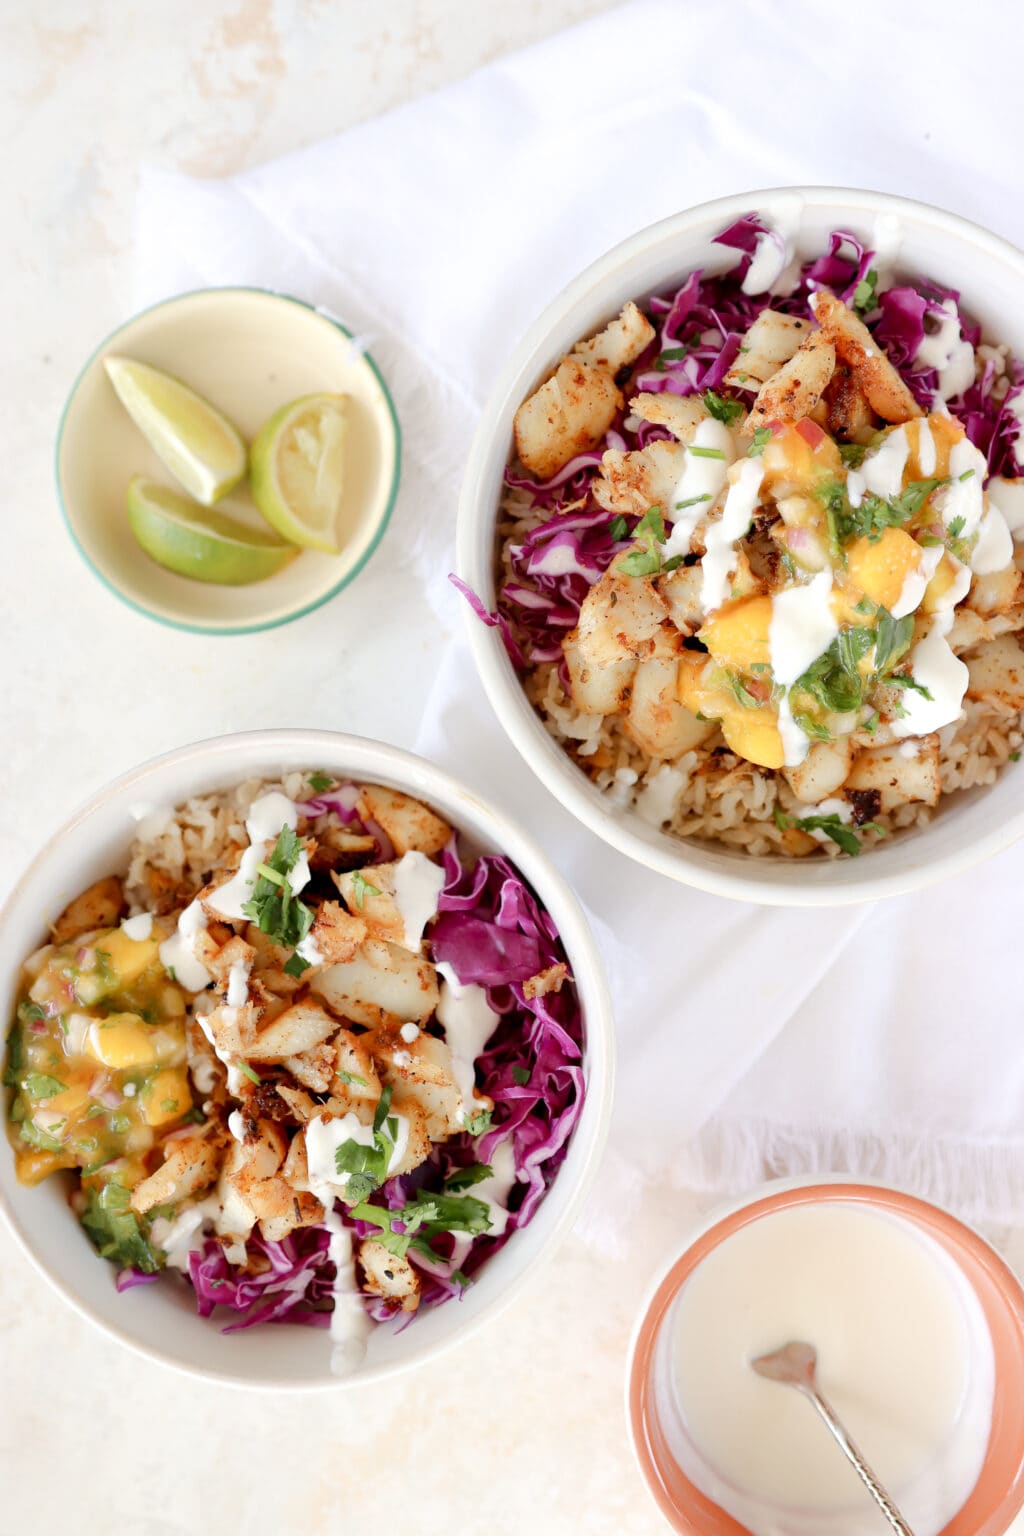 Two white bowls are the focus of the image. There is also a small bowl of lime slices in the lefthand top corned and a small bowl of white lime crema in the bottom right hand/ The bowls are filled with brown rice, mango and habanero salsa, purple cabbage, cajun cod, lime crema and cilantro.